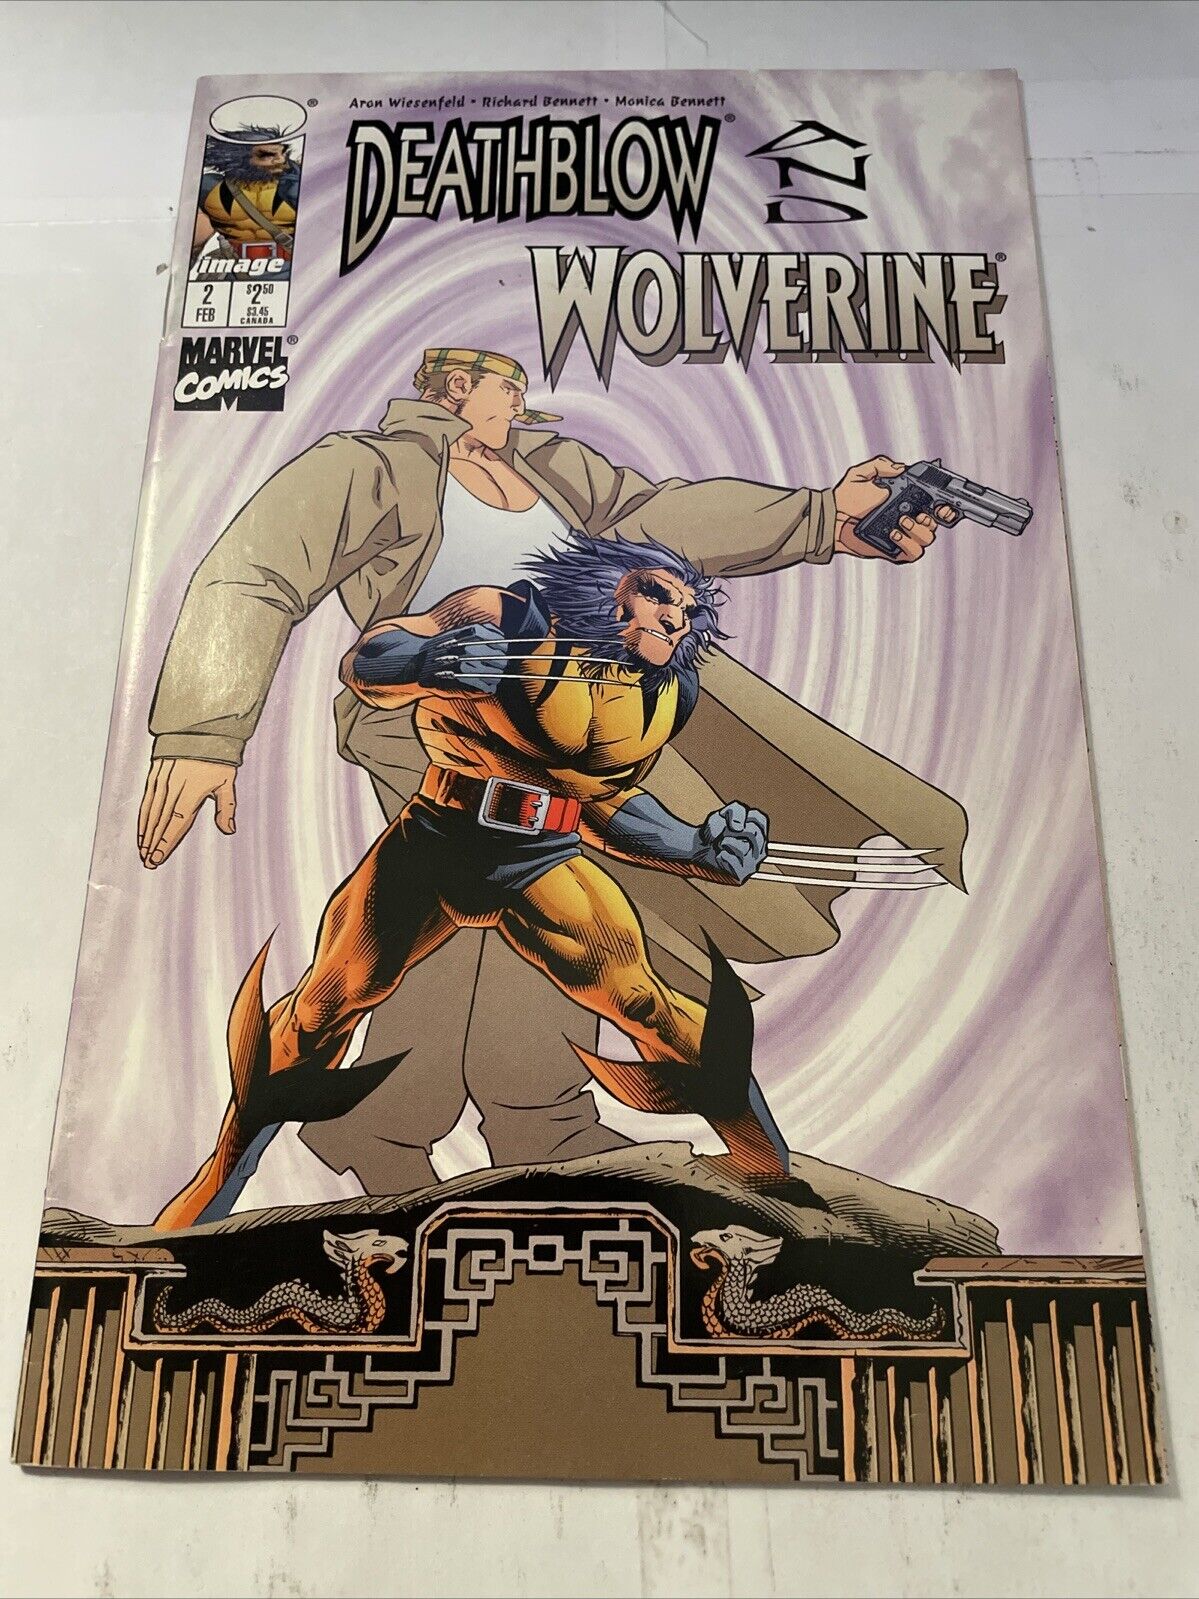 1997 #2 Image Marvel Wolverine And Deathblow VG (Combined Shipping)